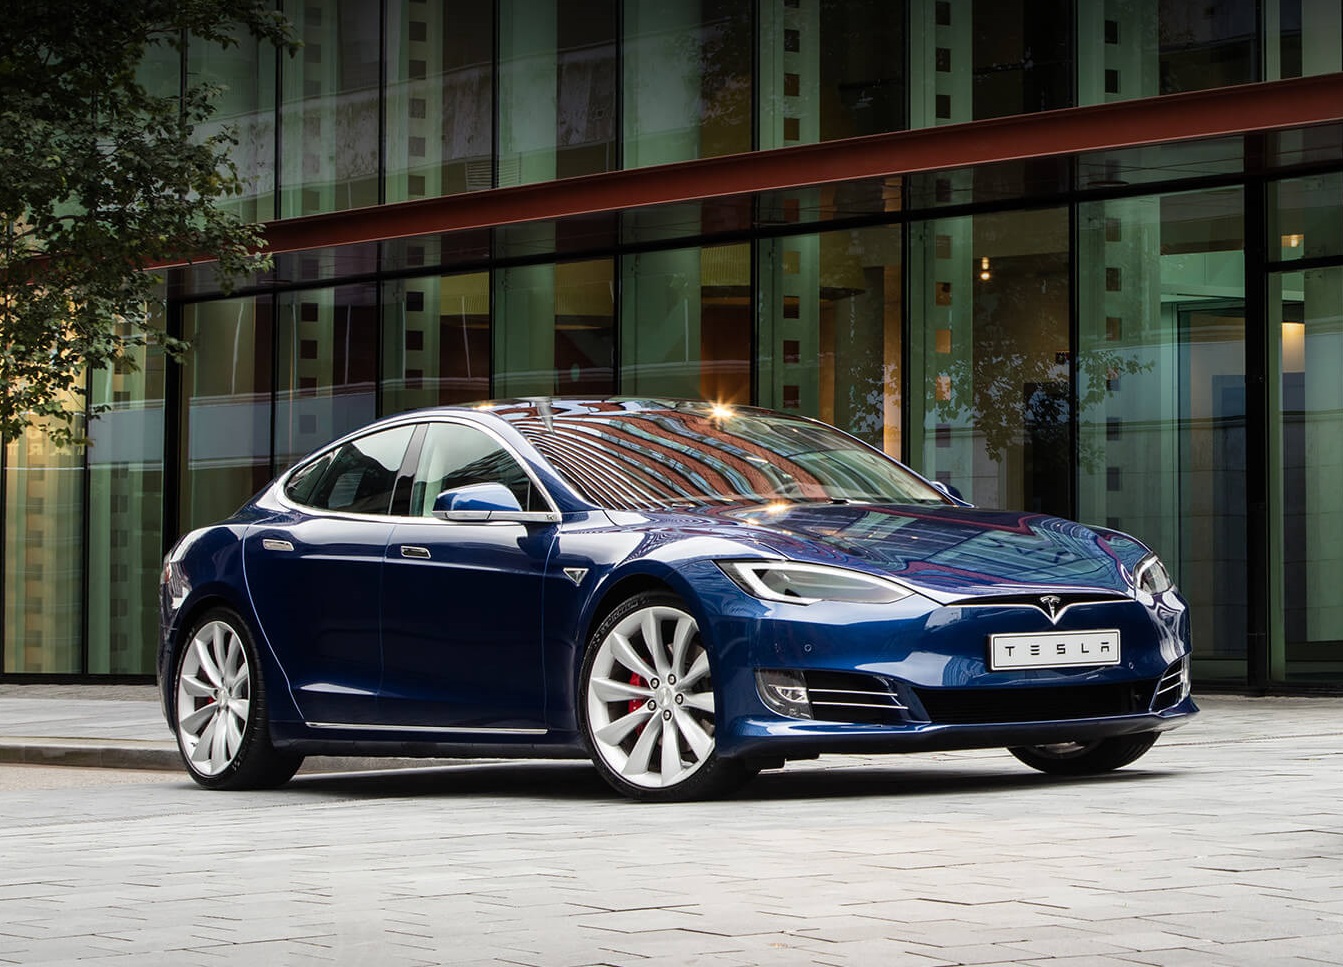 Tesla S be a "collector car"? Tuckers but Kaisers aren't: why?